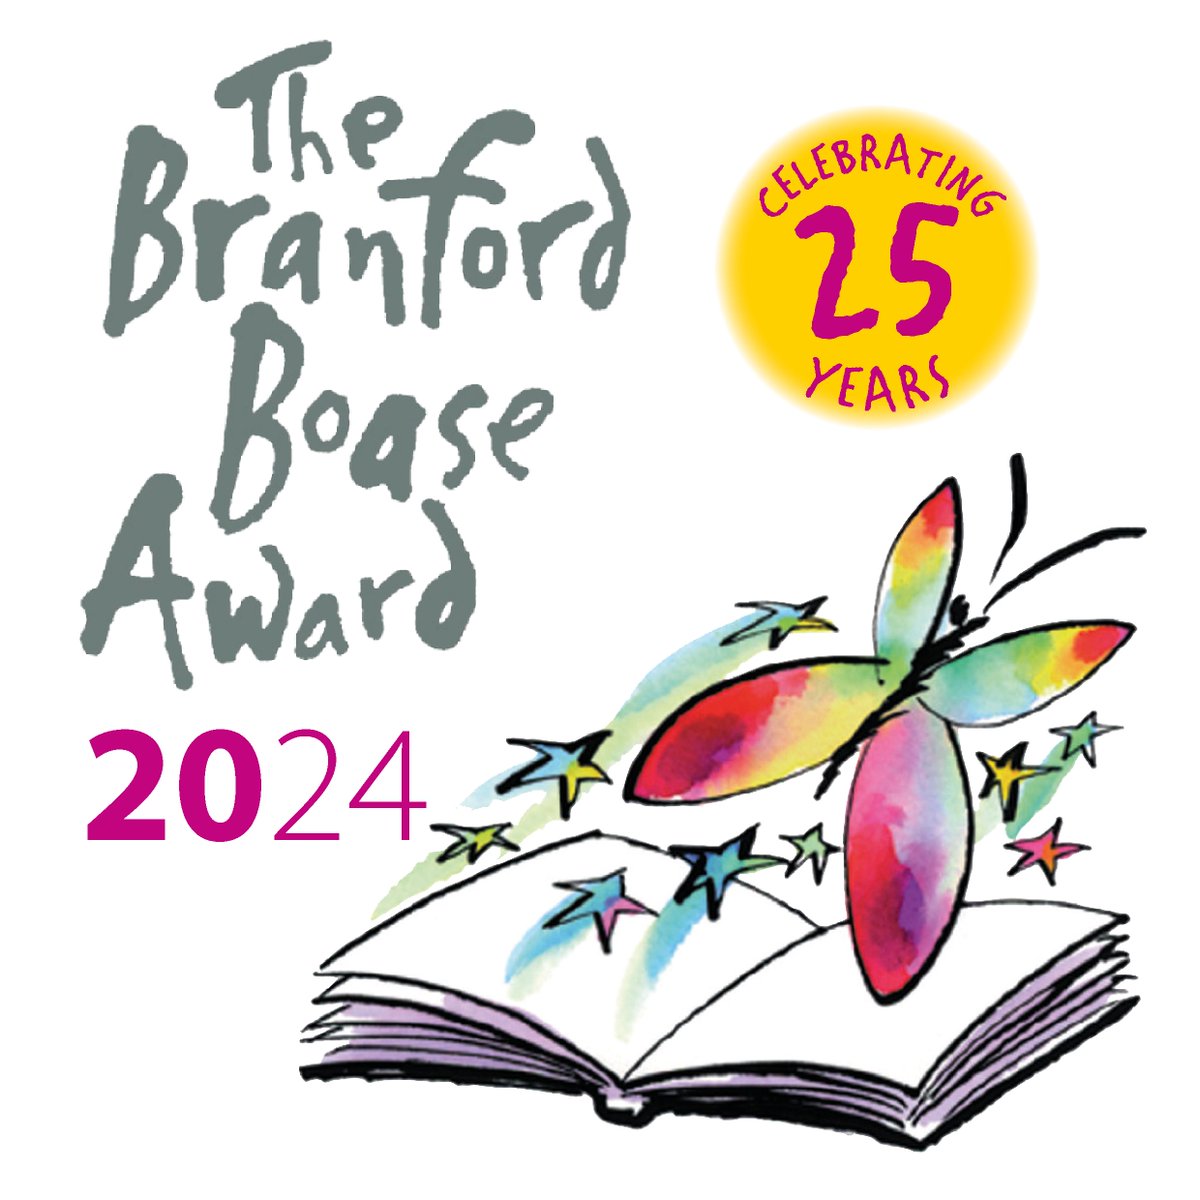 Marking its 25th anniversary in style! Shortlist announced for the #BranfordBoaseAward presented annually to the author AND editor of the outstanding debut novel for children. ow.ly/pMw250RnBHL @BranfordBoase